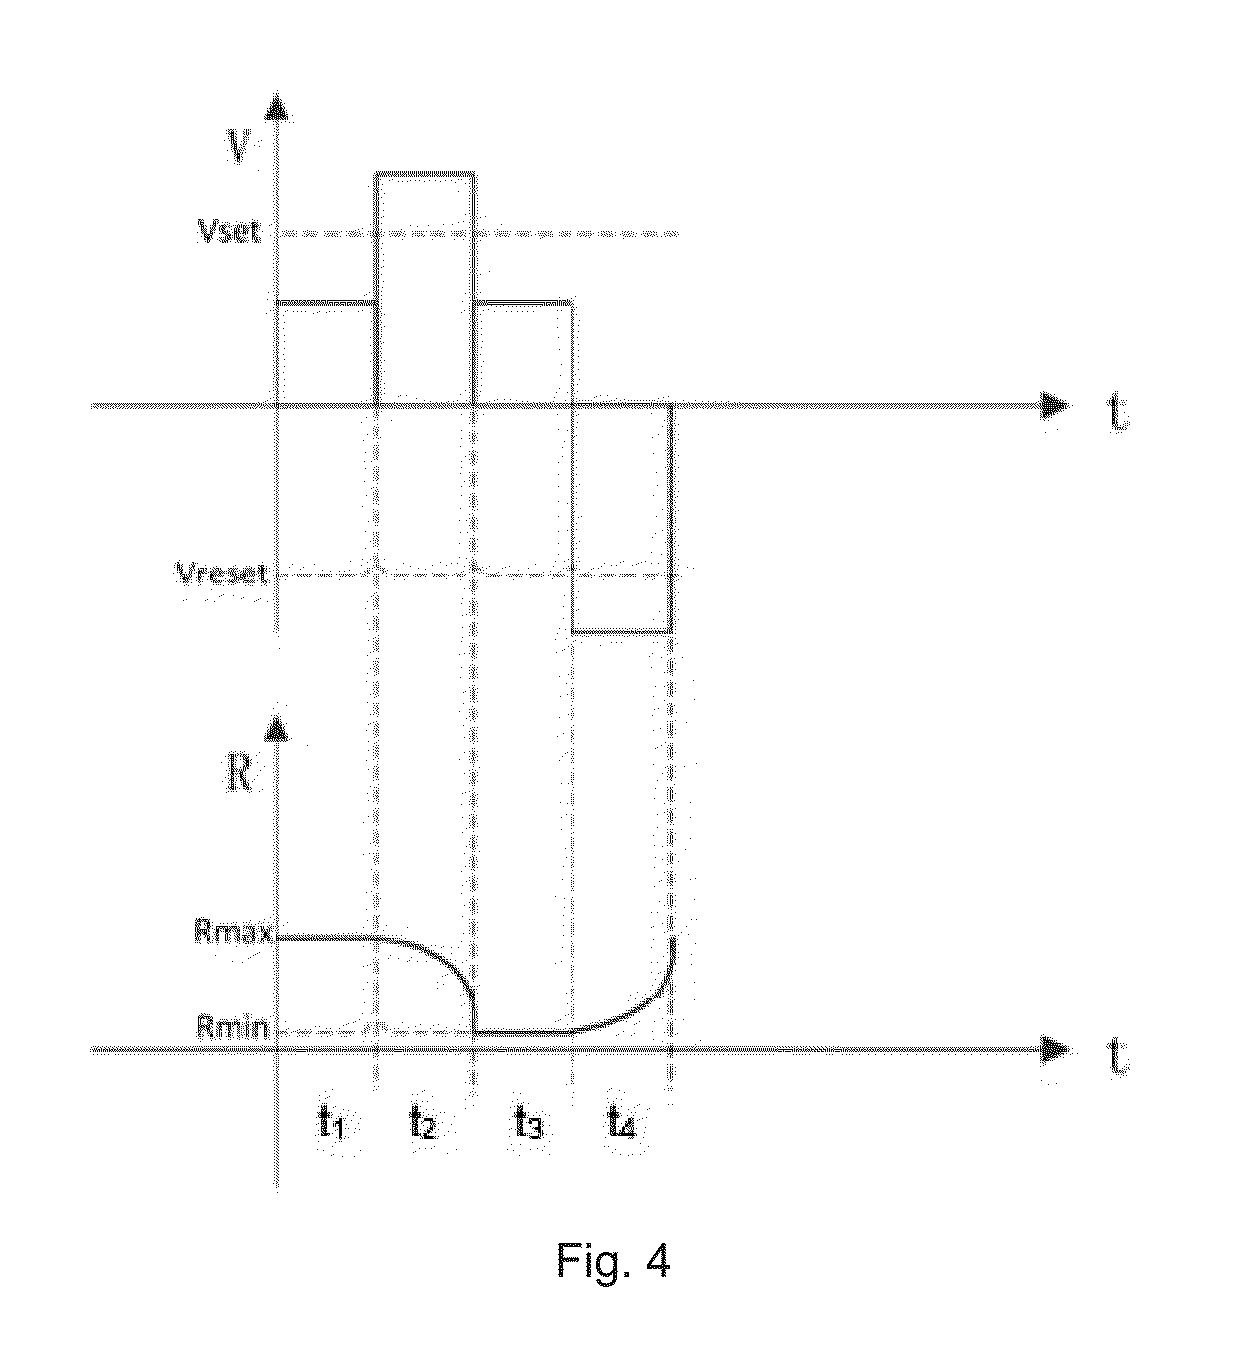 Time Correlation Learning Neuron Circuit Based on a Resistive Memristor and an Implementation Method Thereof